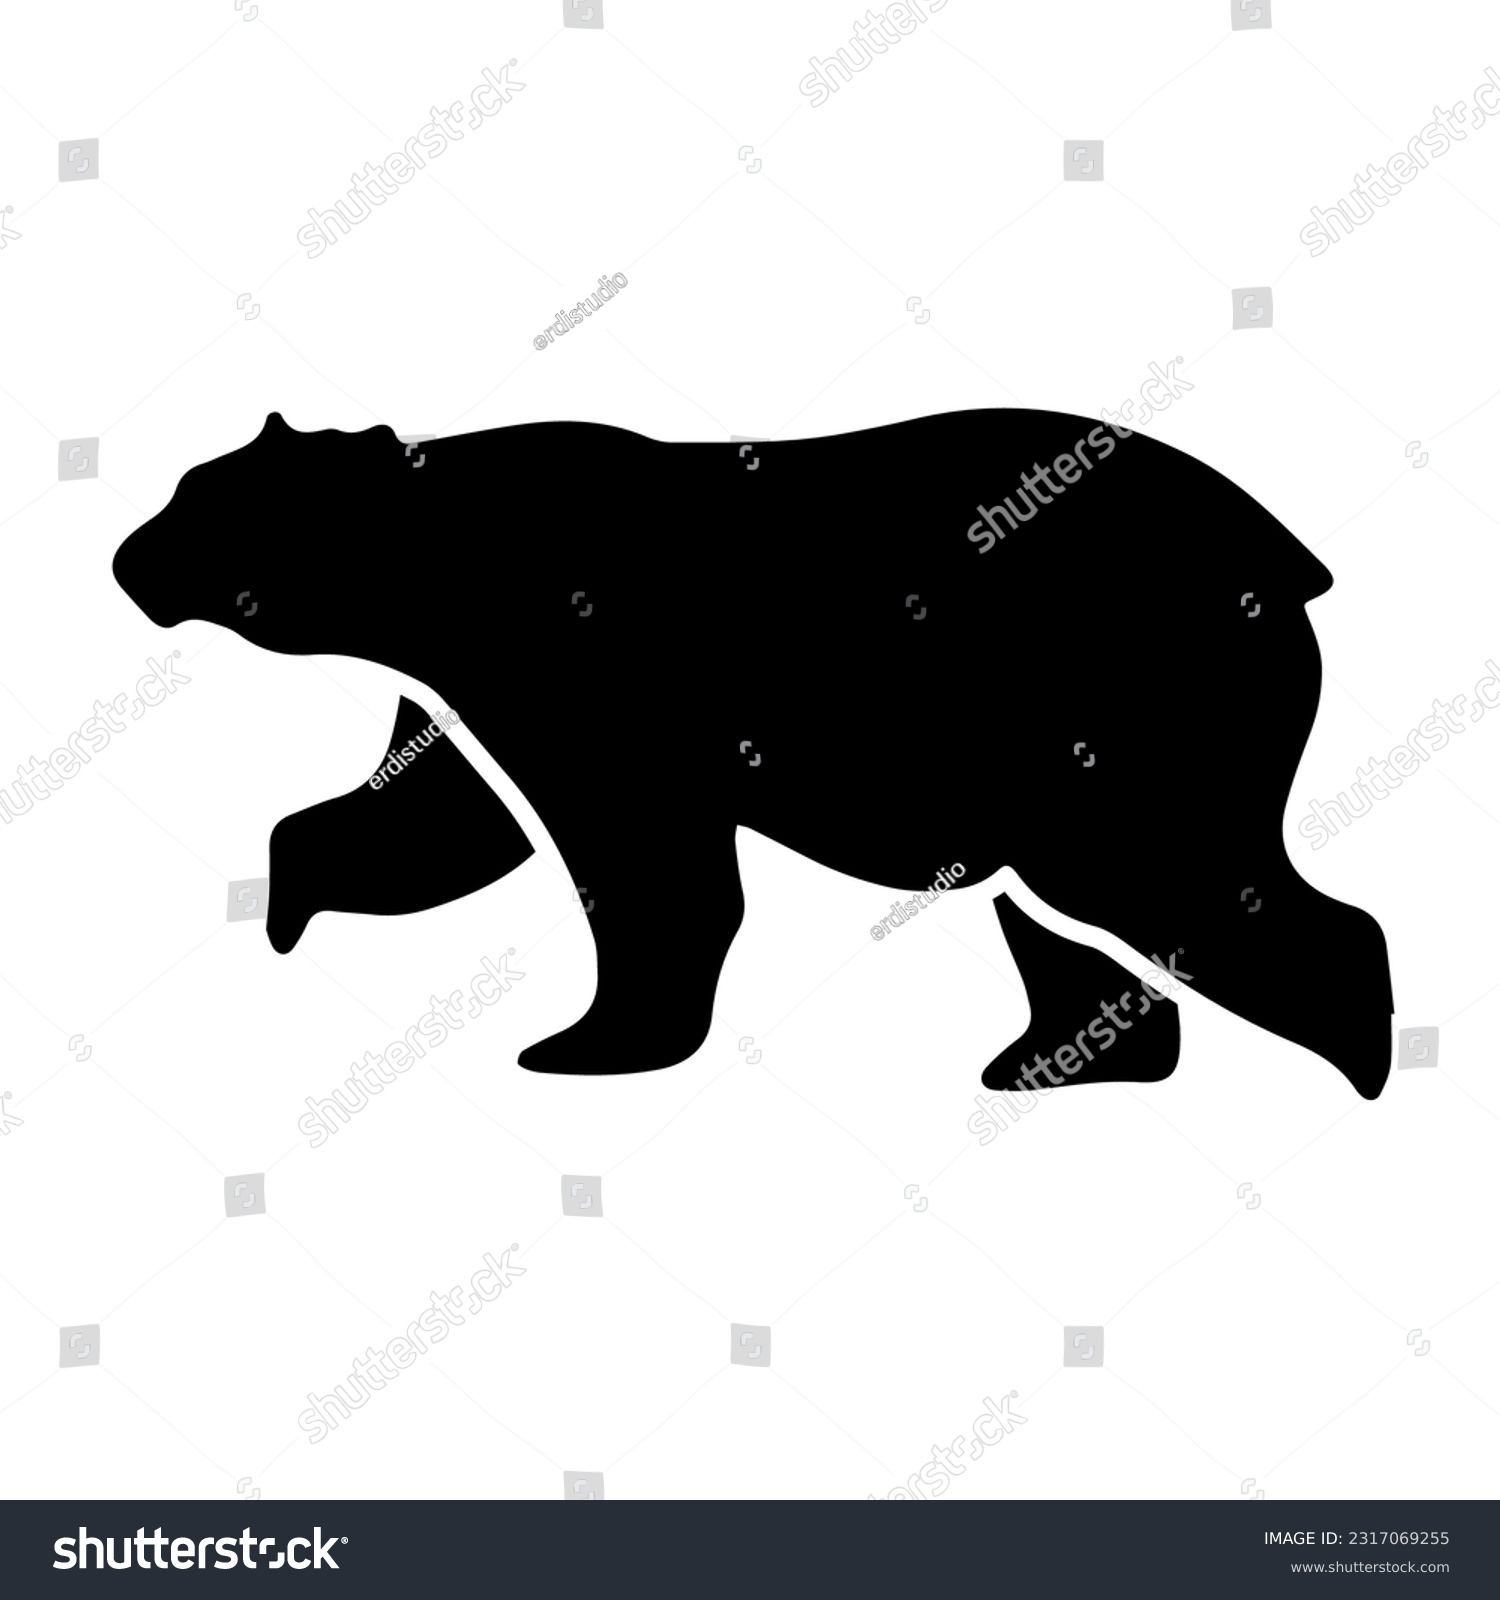 SVG of various bear silhouettes on a white background svg